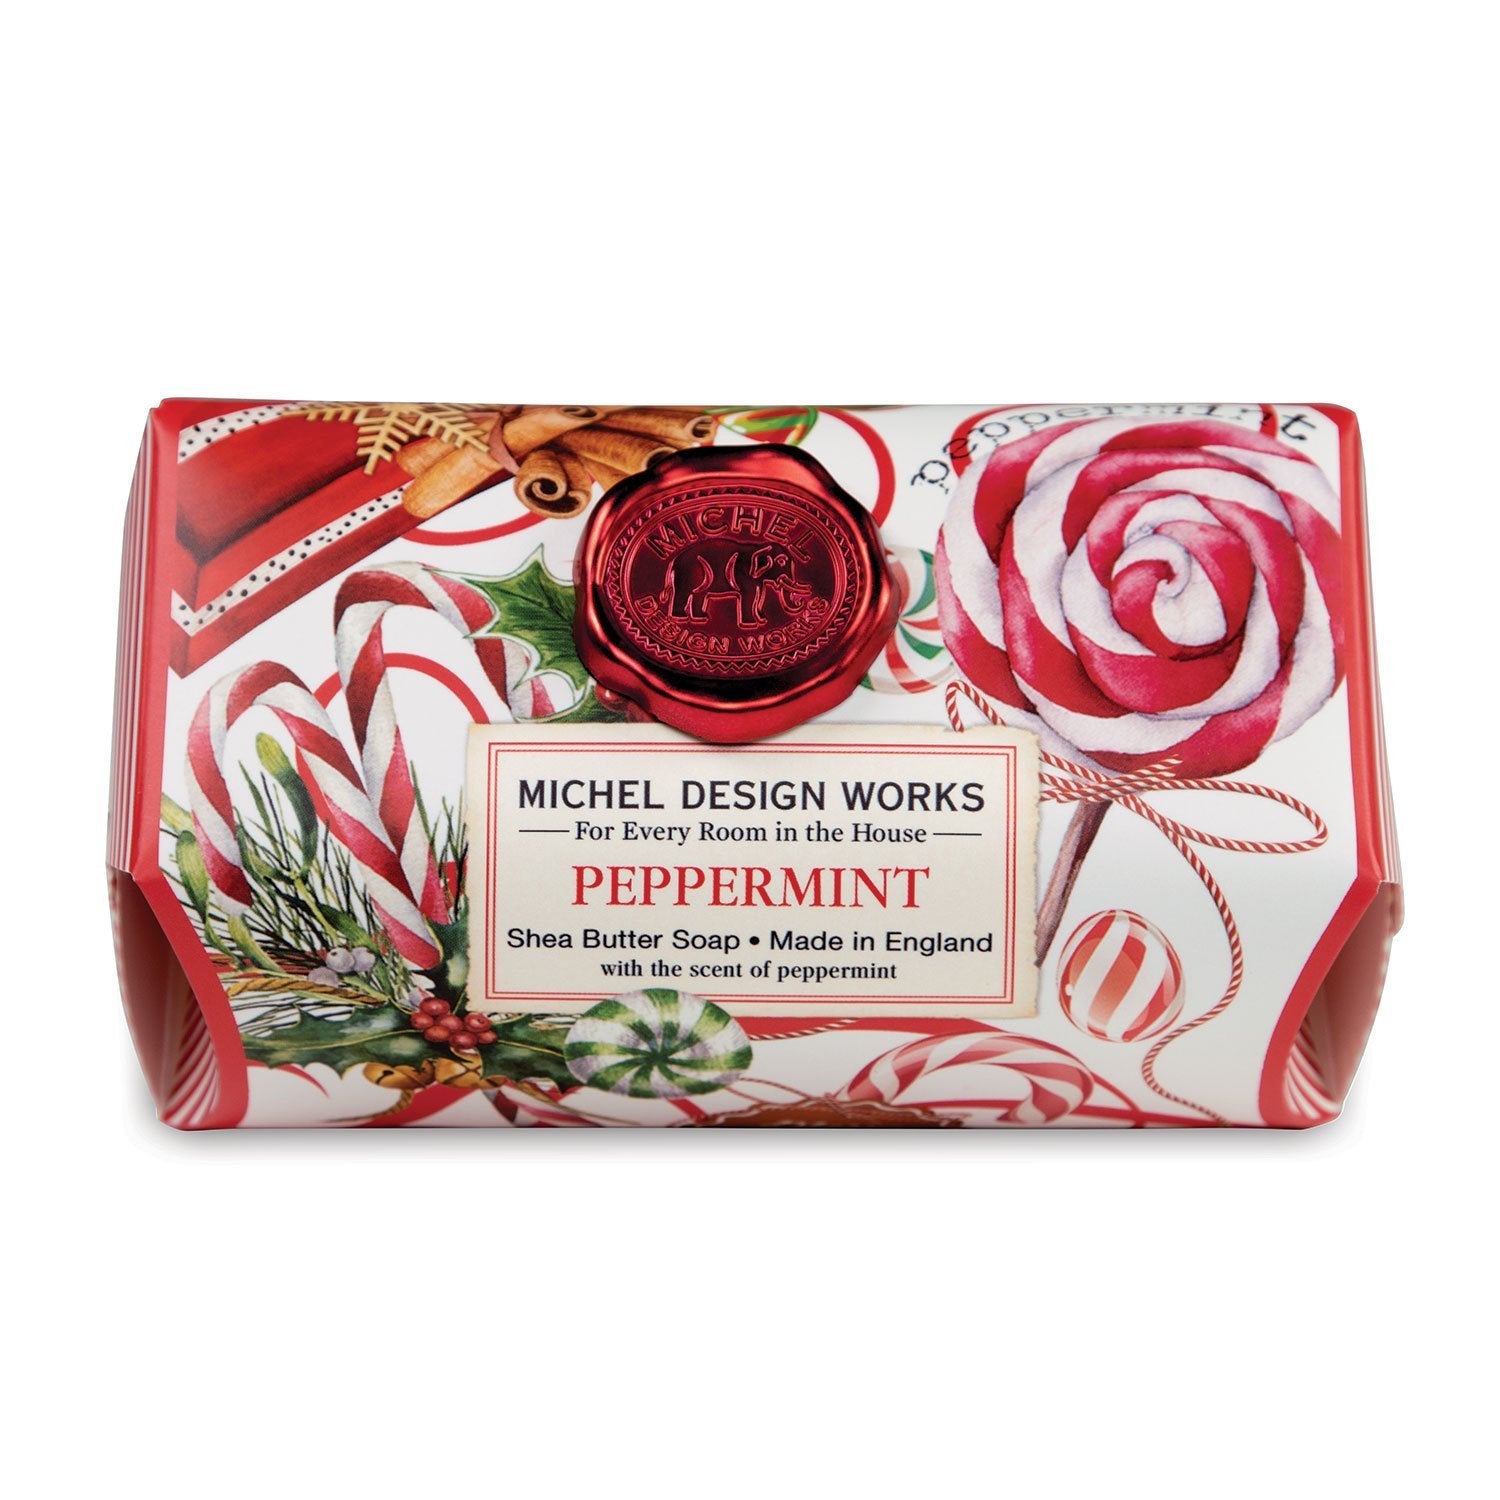 hampers in Melbourne need peppermint Christmas body bars!